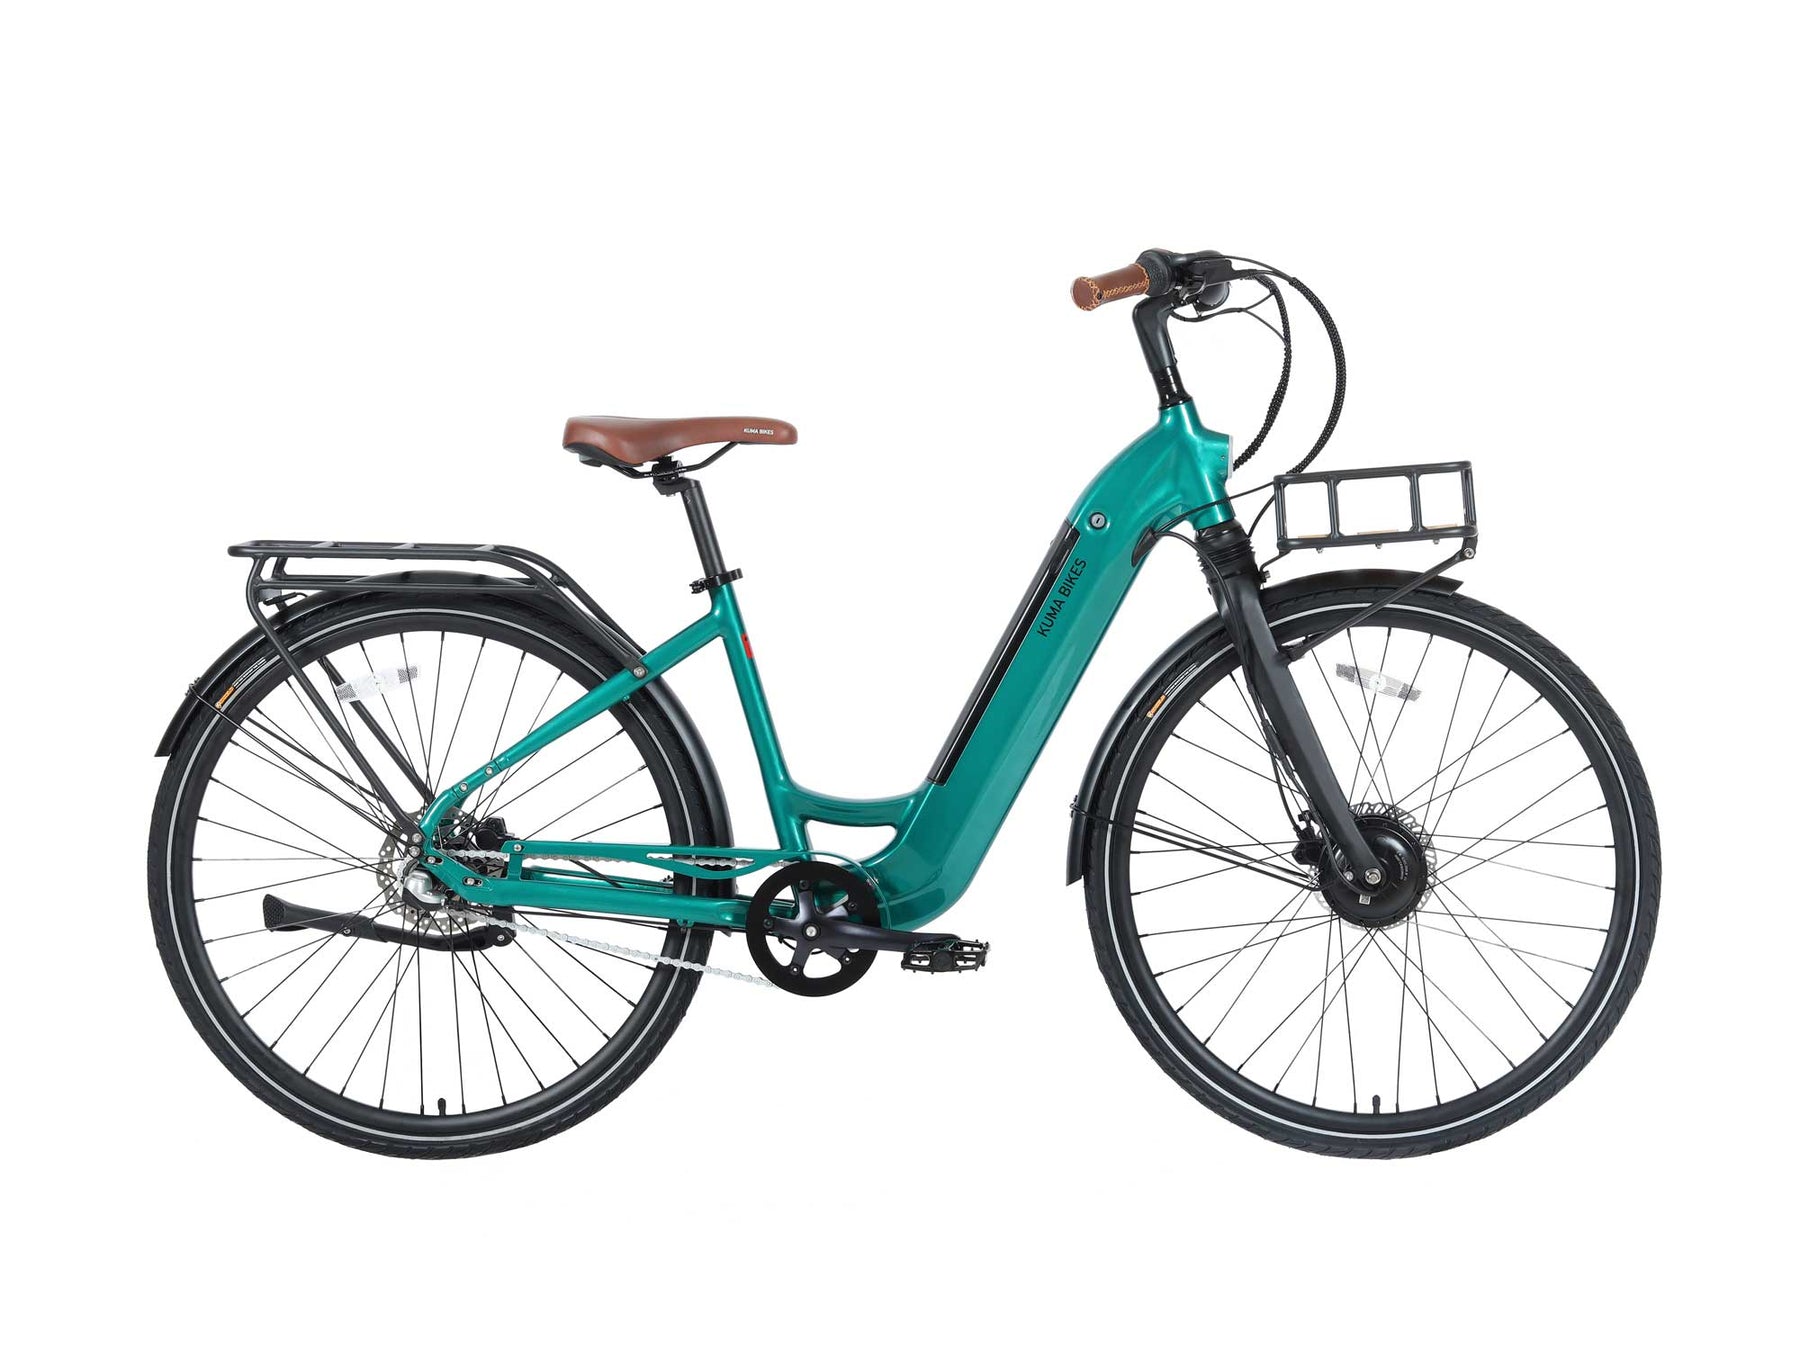 A product image of the Kuma S2 electric bike showing the right side of the bike against a white background. The frame colour is Emerald Green..